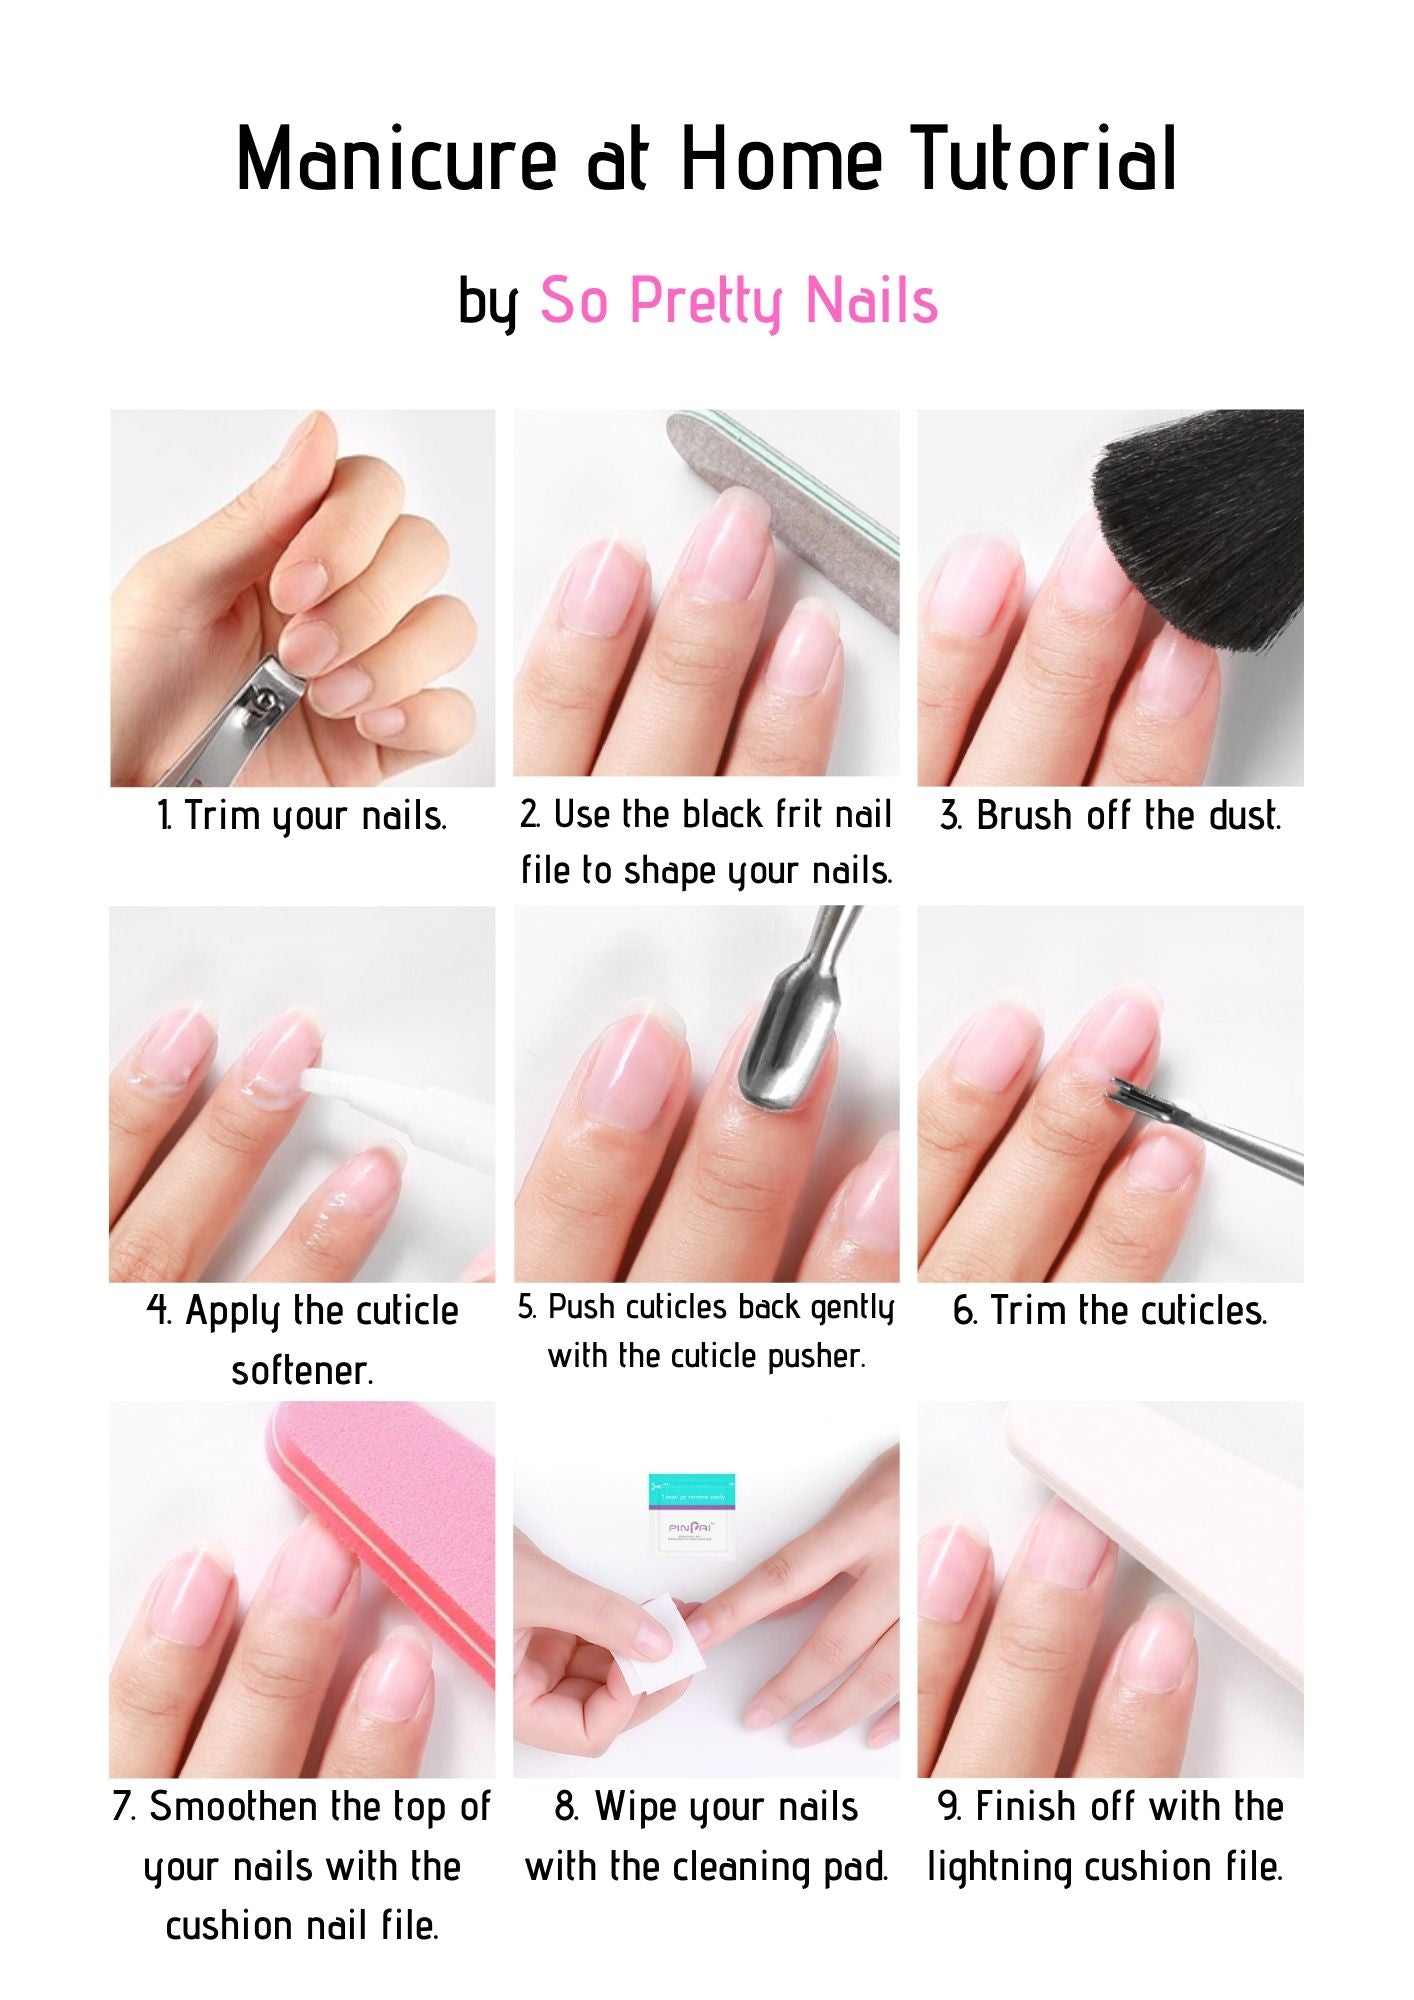 Cuticle Trimmer / Nail Cleaner